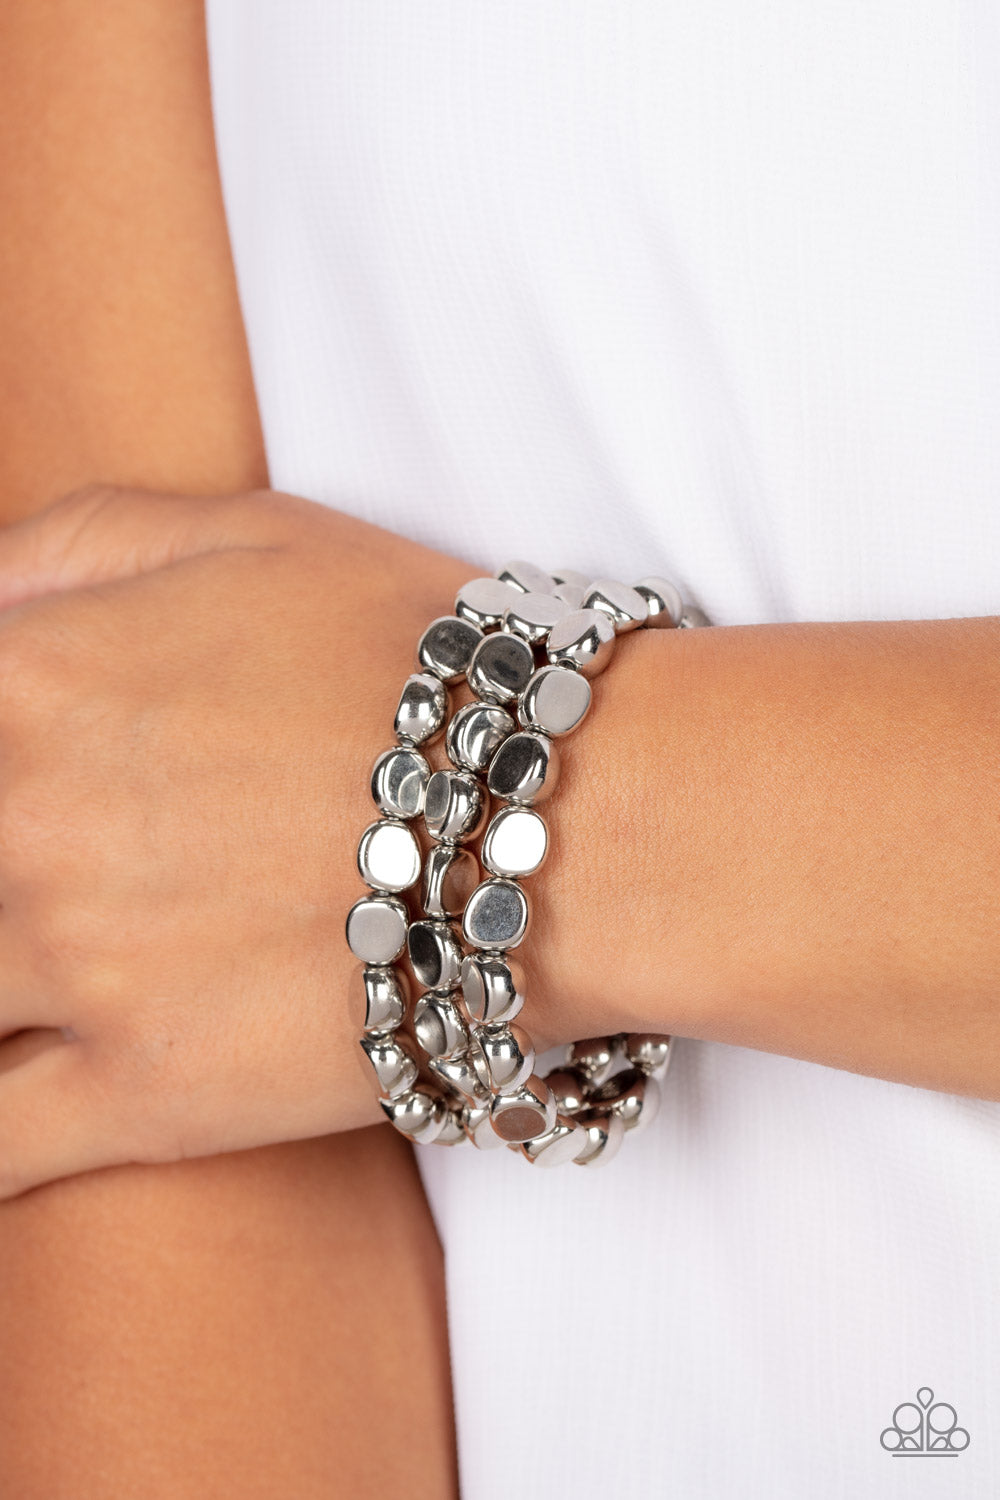 Featuring irregular stone shapes, a shiny series of silver beads are threaded along stretchy bands around the wrist for a bold pop of monochromatic magic.